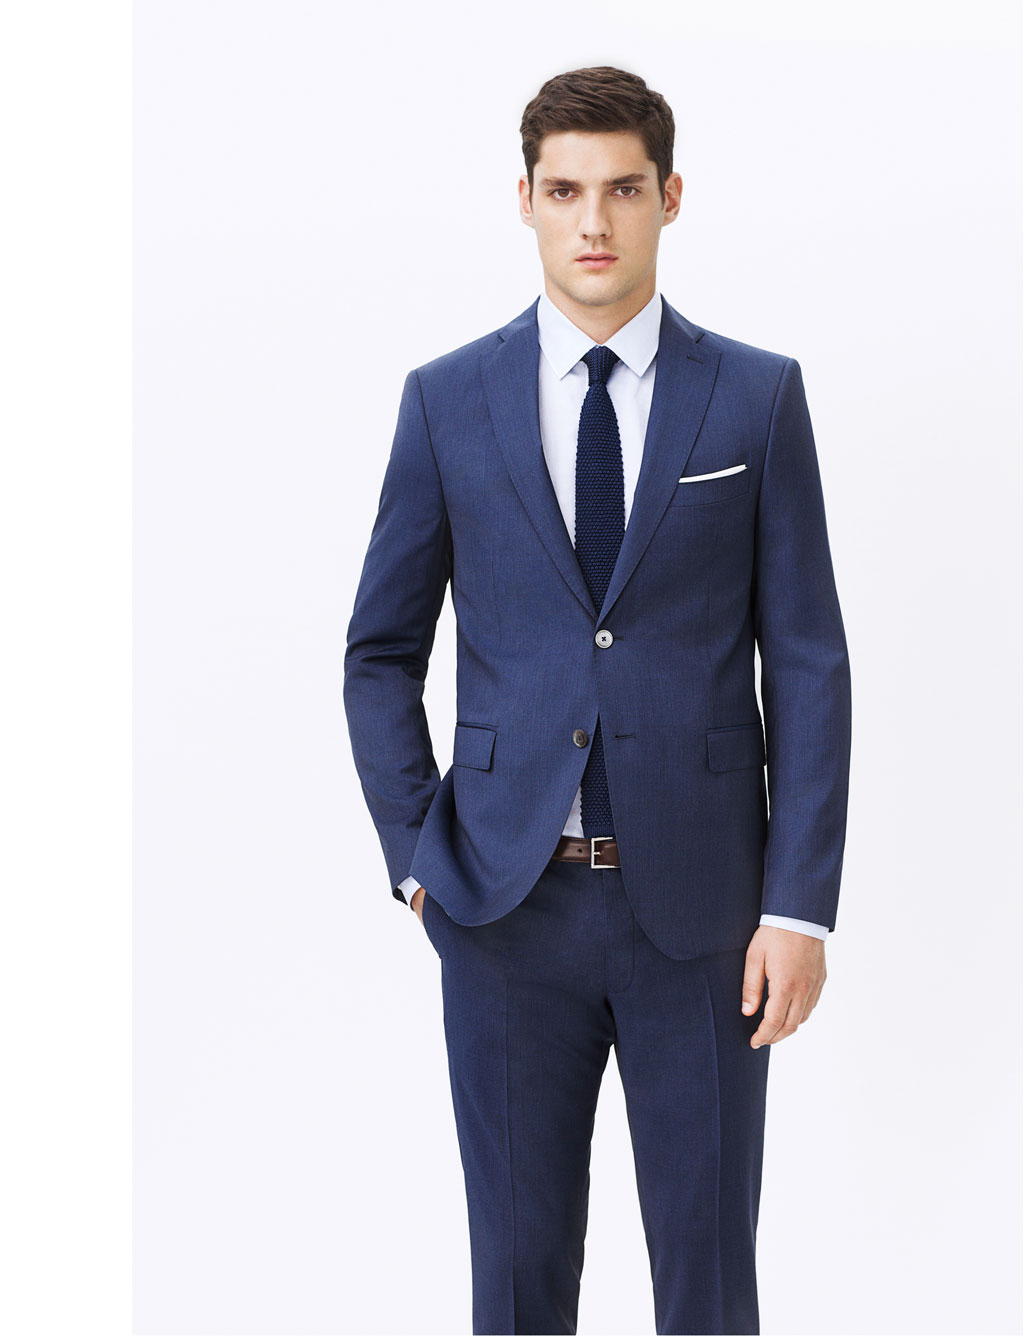 Planning on getting suited and booted this summer? If so this lookbook ...